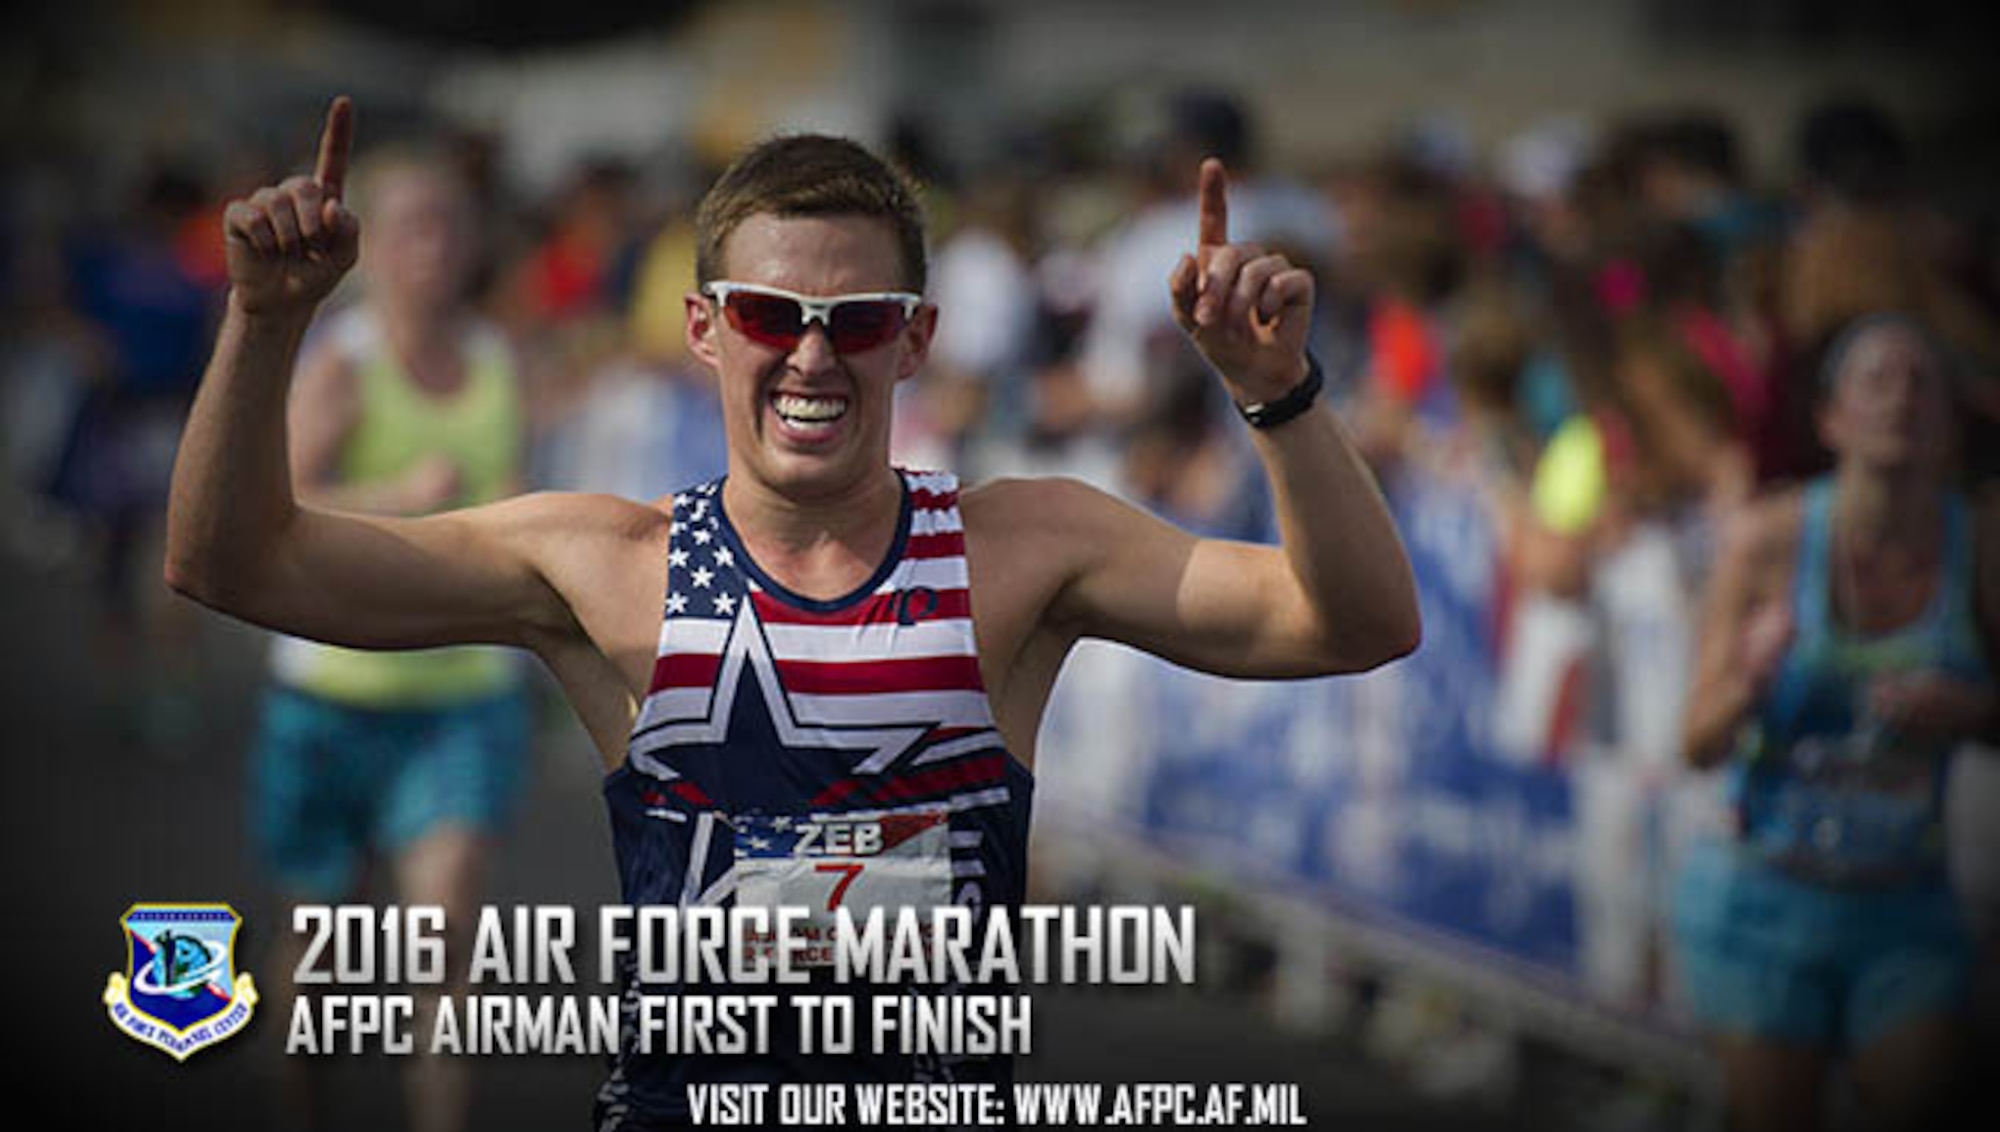 First Lt. Zebulon Hanley of San Antonio crosses the finish line to become the winner of the 20th U.S. Air Force Marathon men’s full marathon division at Wright-Patterson Air Force Base, Ohio, with a time of 2:47:04. (U.S. Air Force courtesy photo)